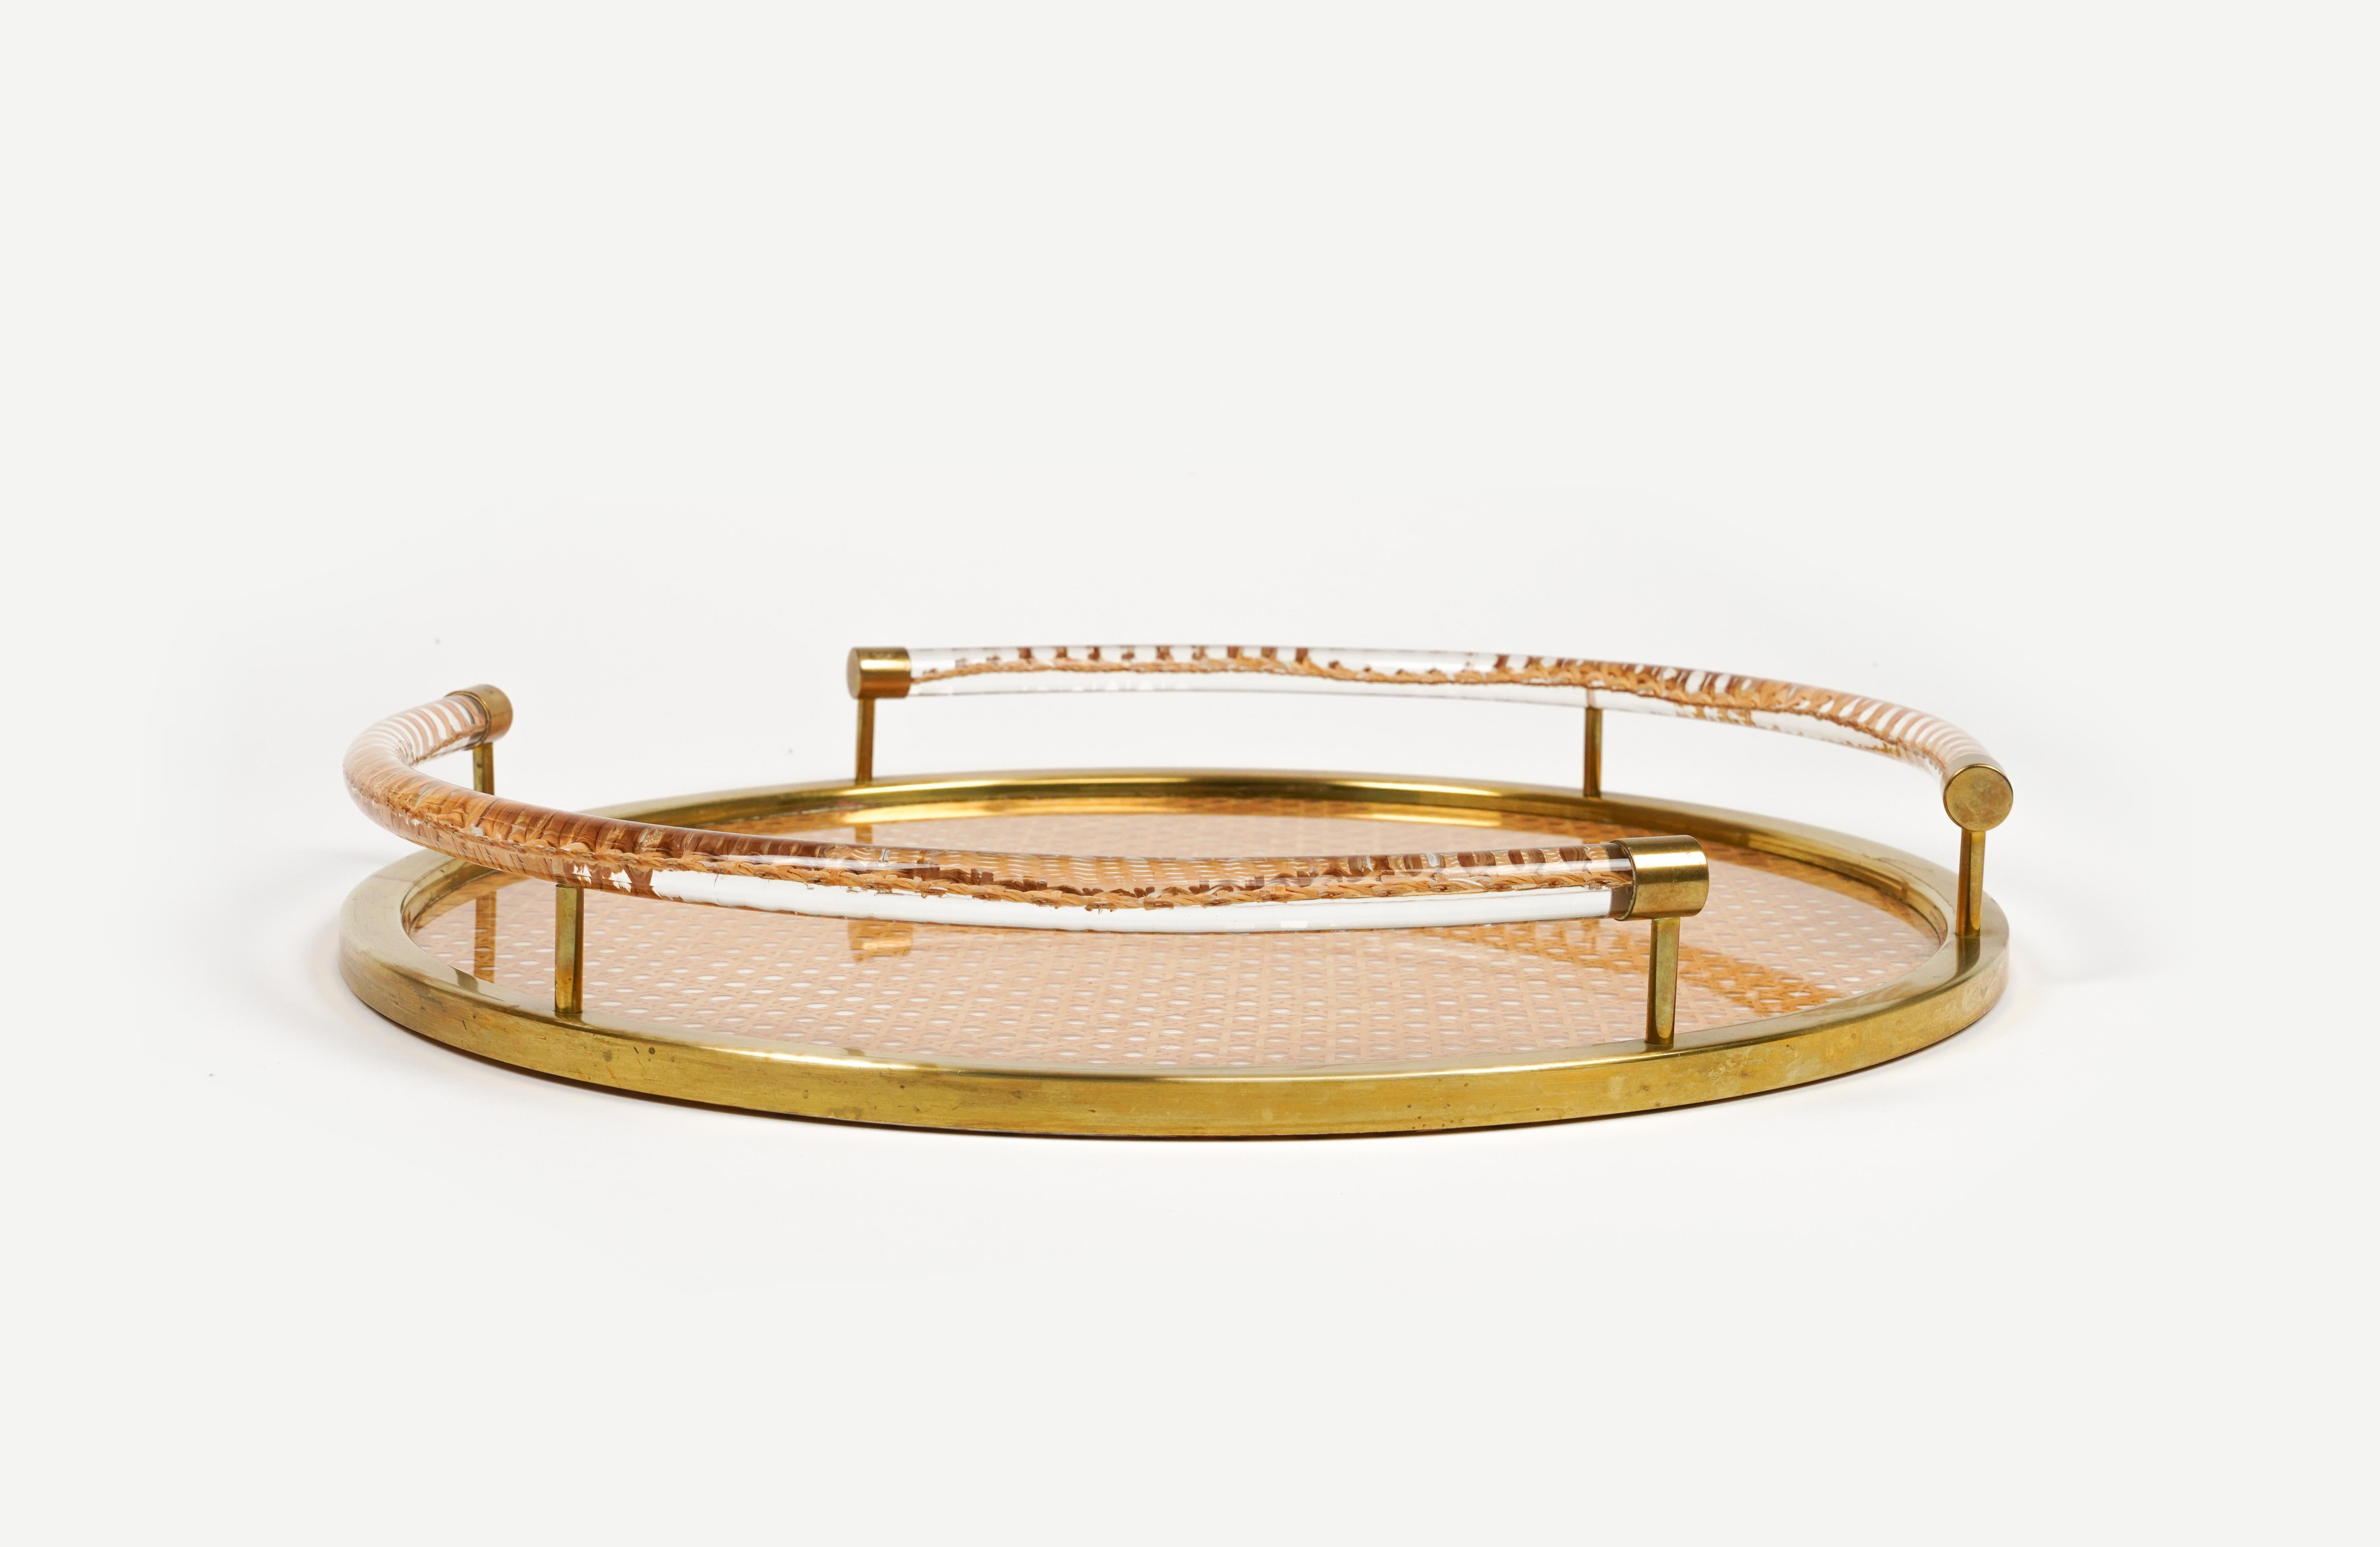 Round Serving Tray in Lucite, Rattan and Brass Christian Dior Style, Italy 1970s For Sale 2